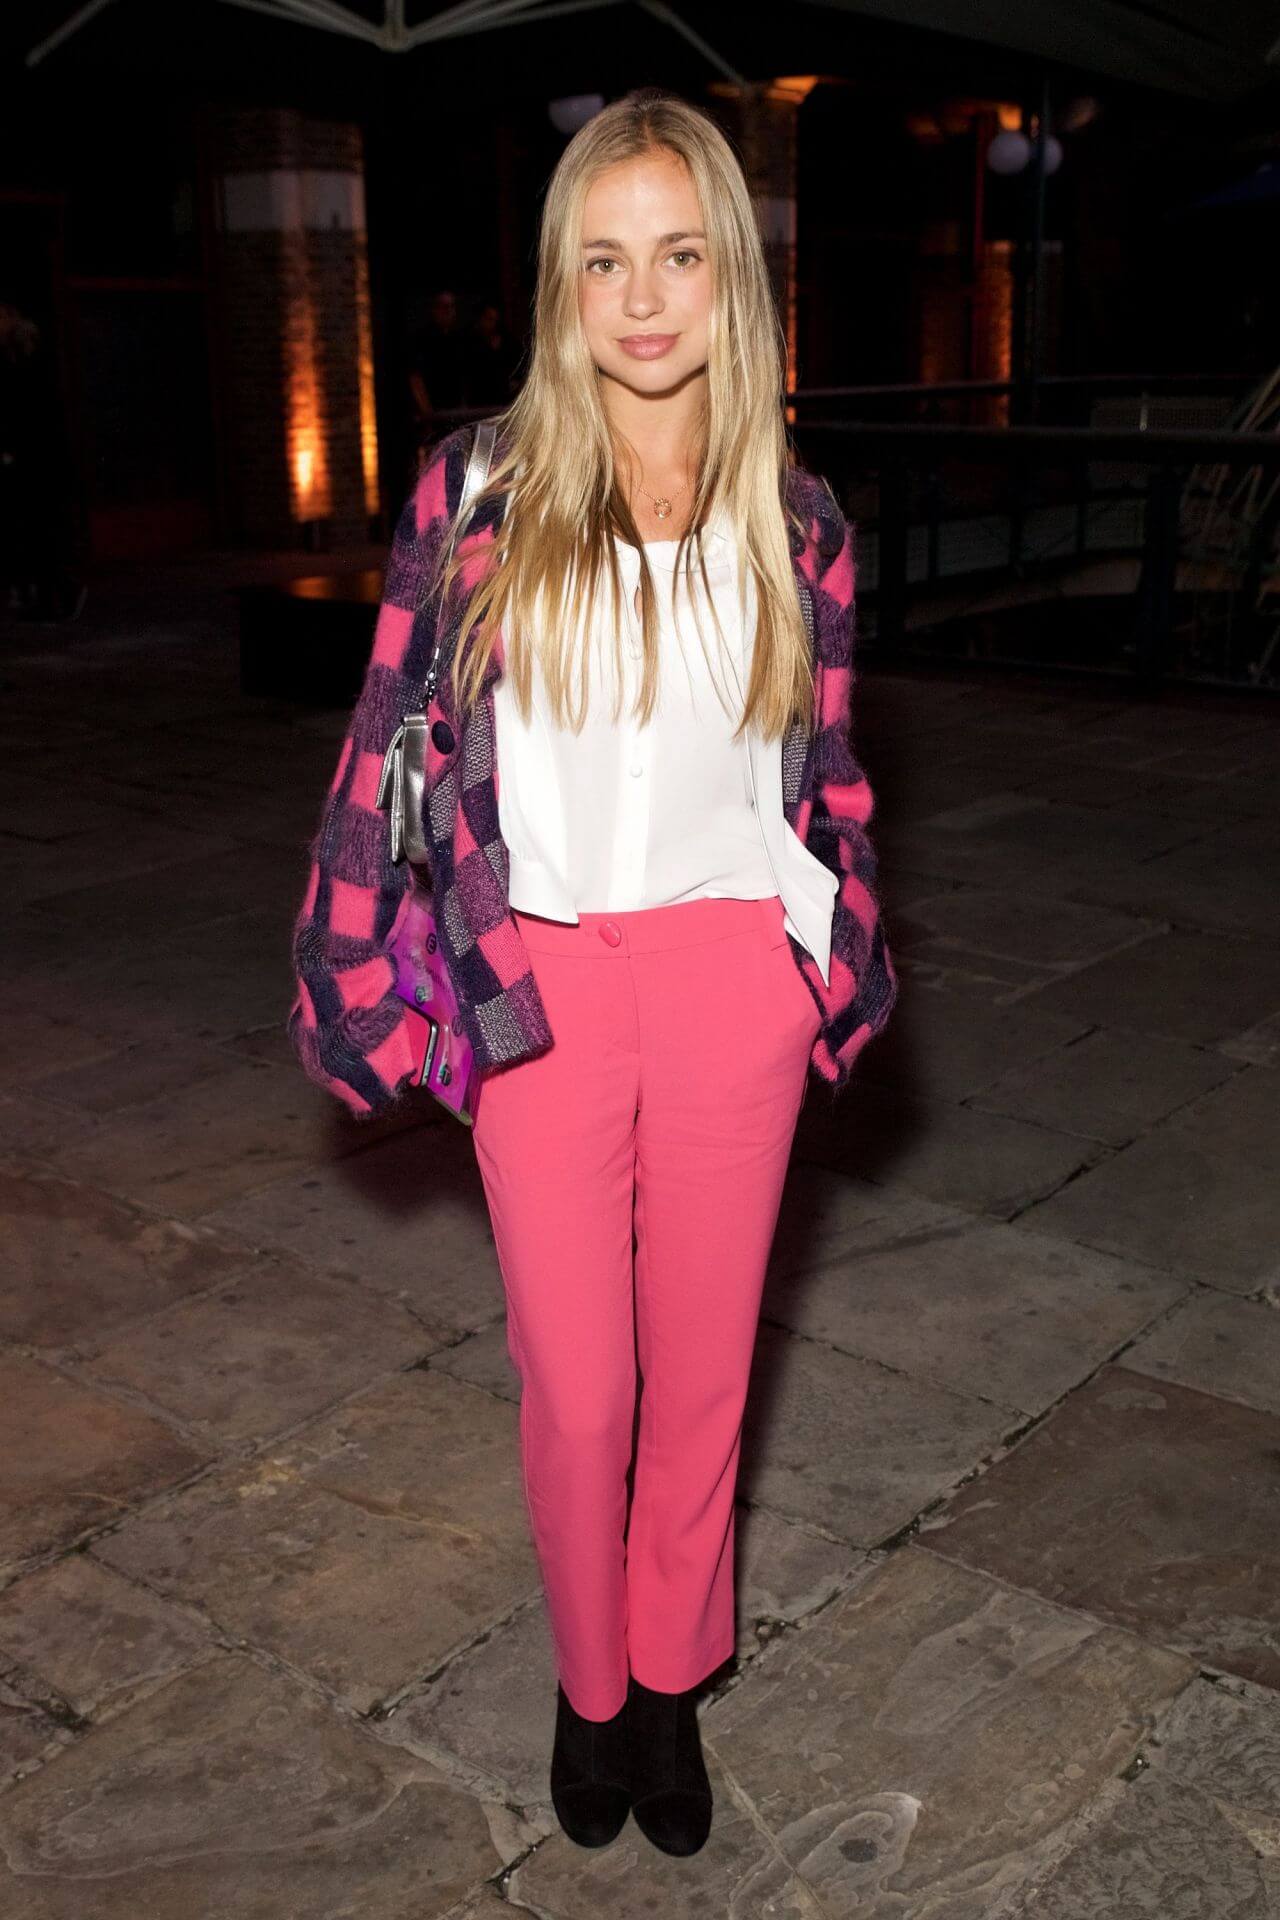 Amelia Windsor In White Top & Pink Pants with Checked Jacket At Emporio Armani Show in London